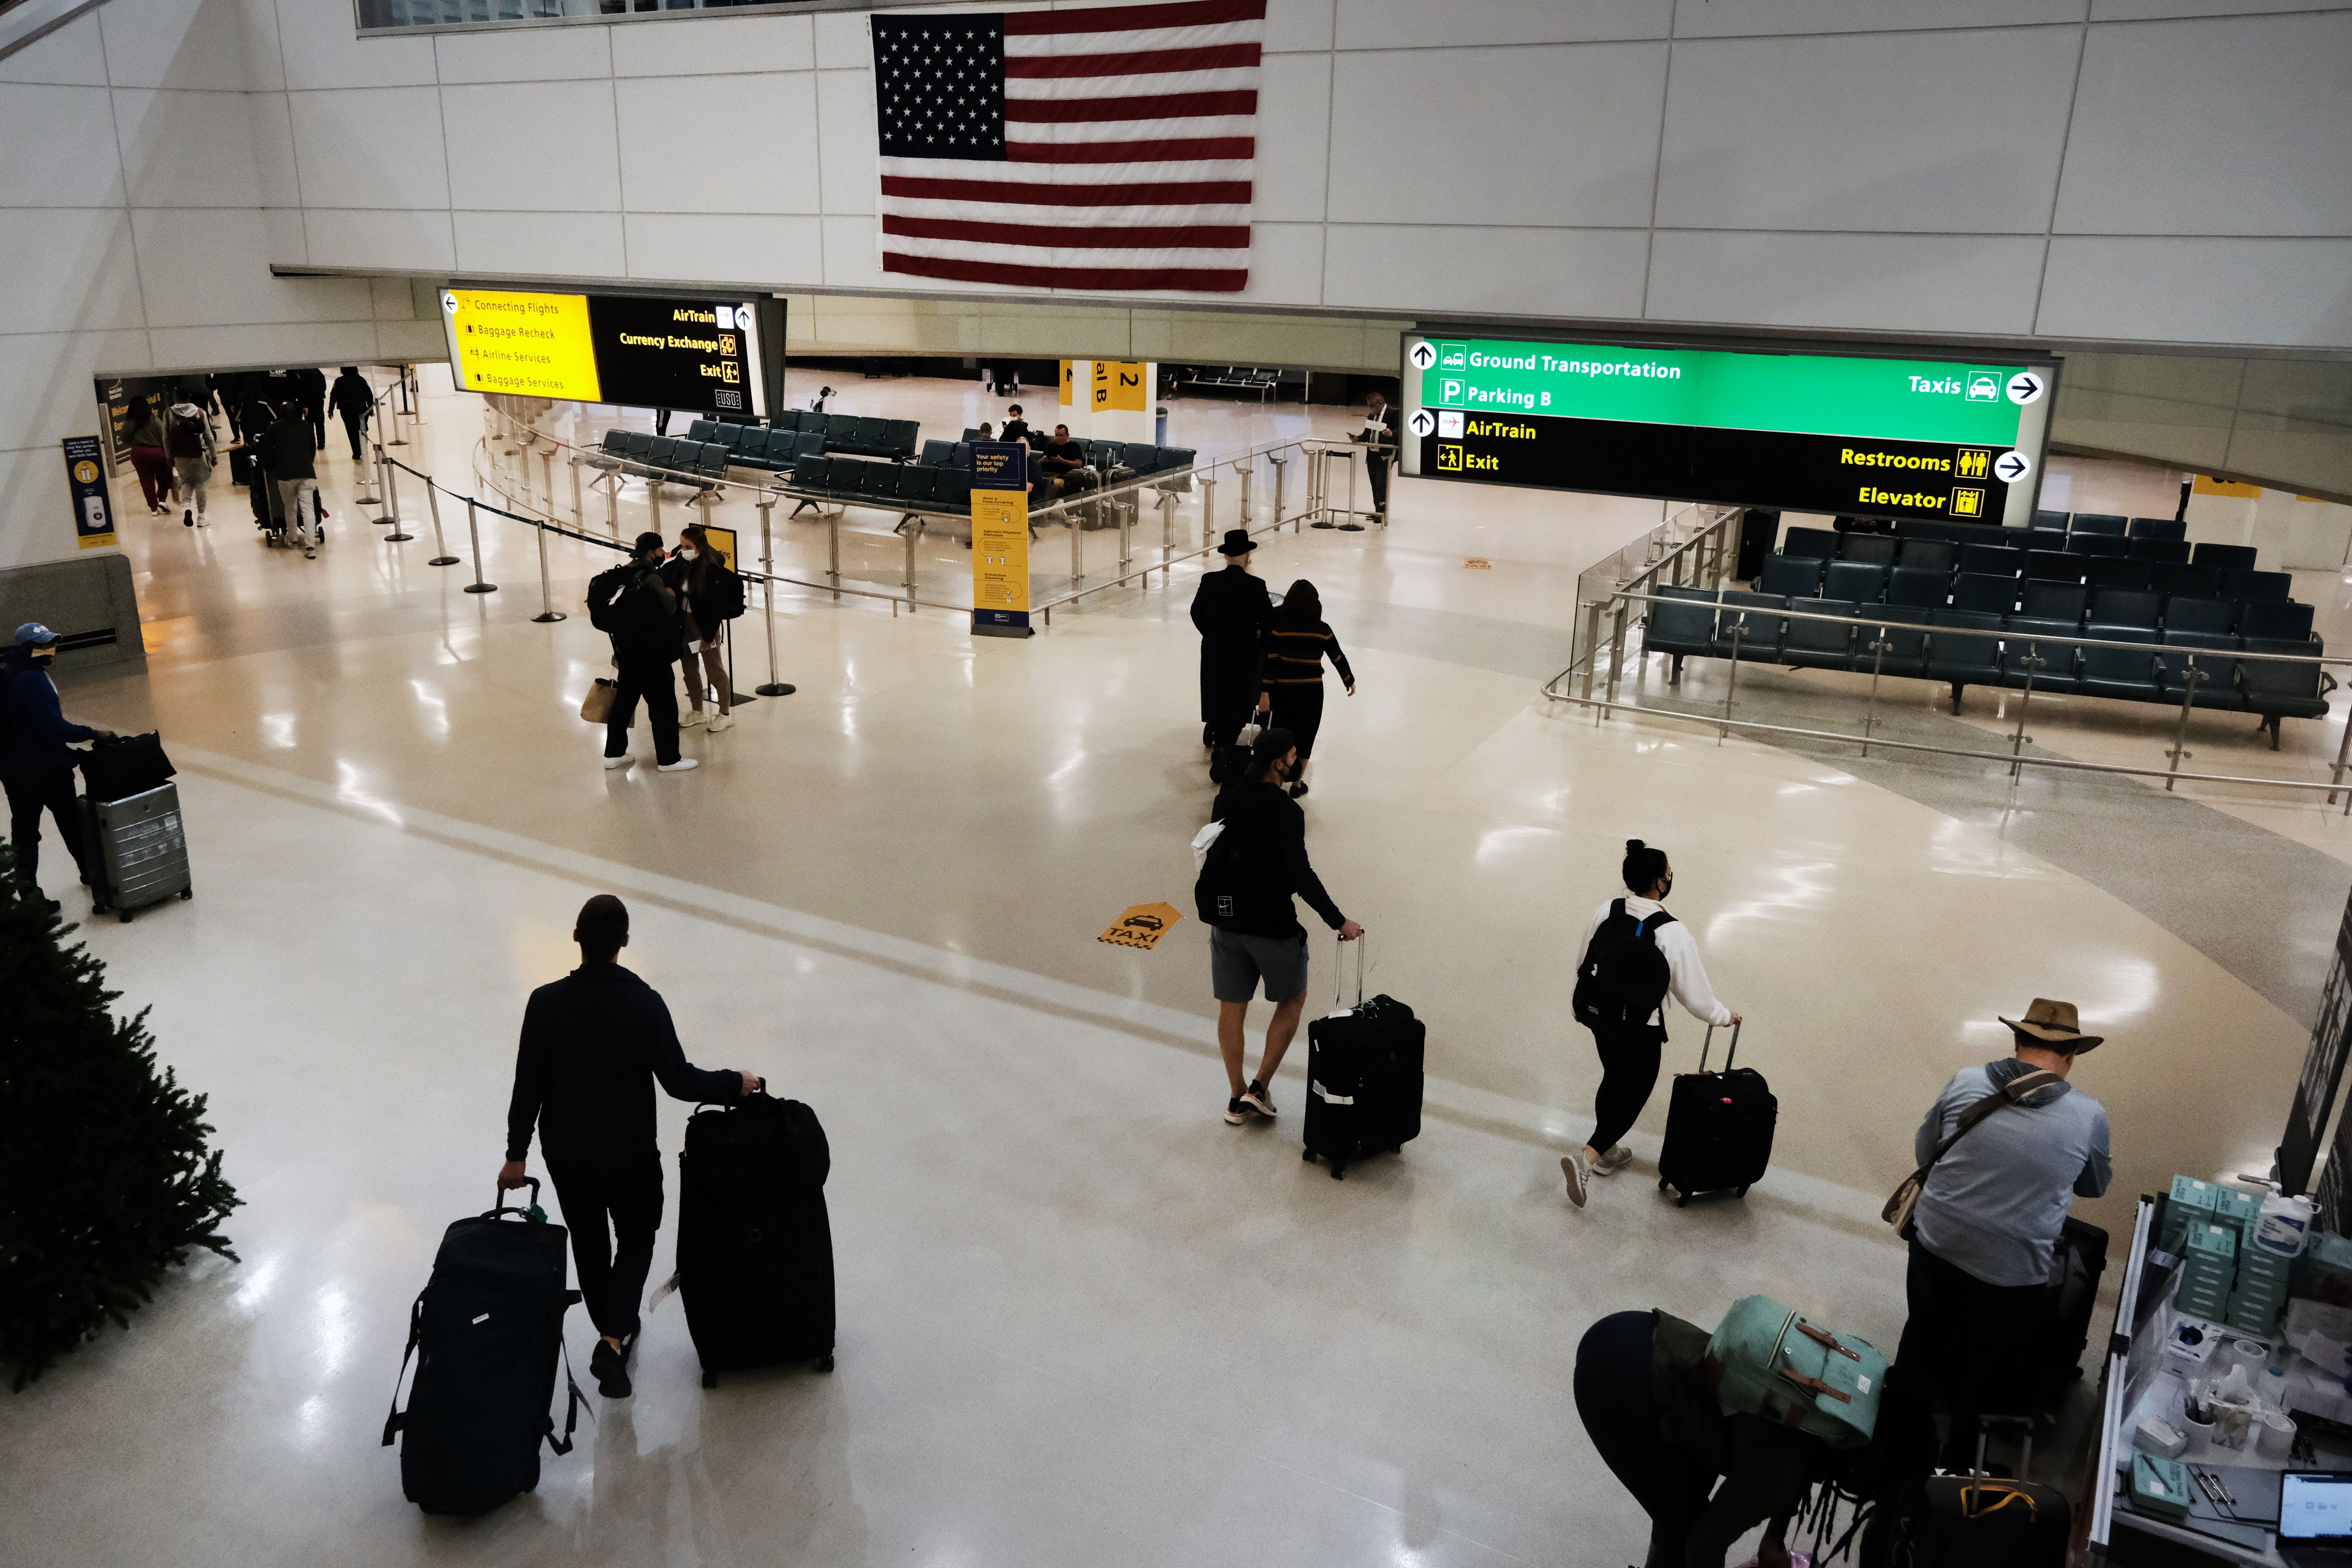 Travelers arrive from international flights at Newark Liberty International Airport in New Jersey on November 30.